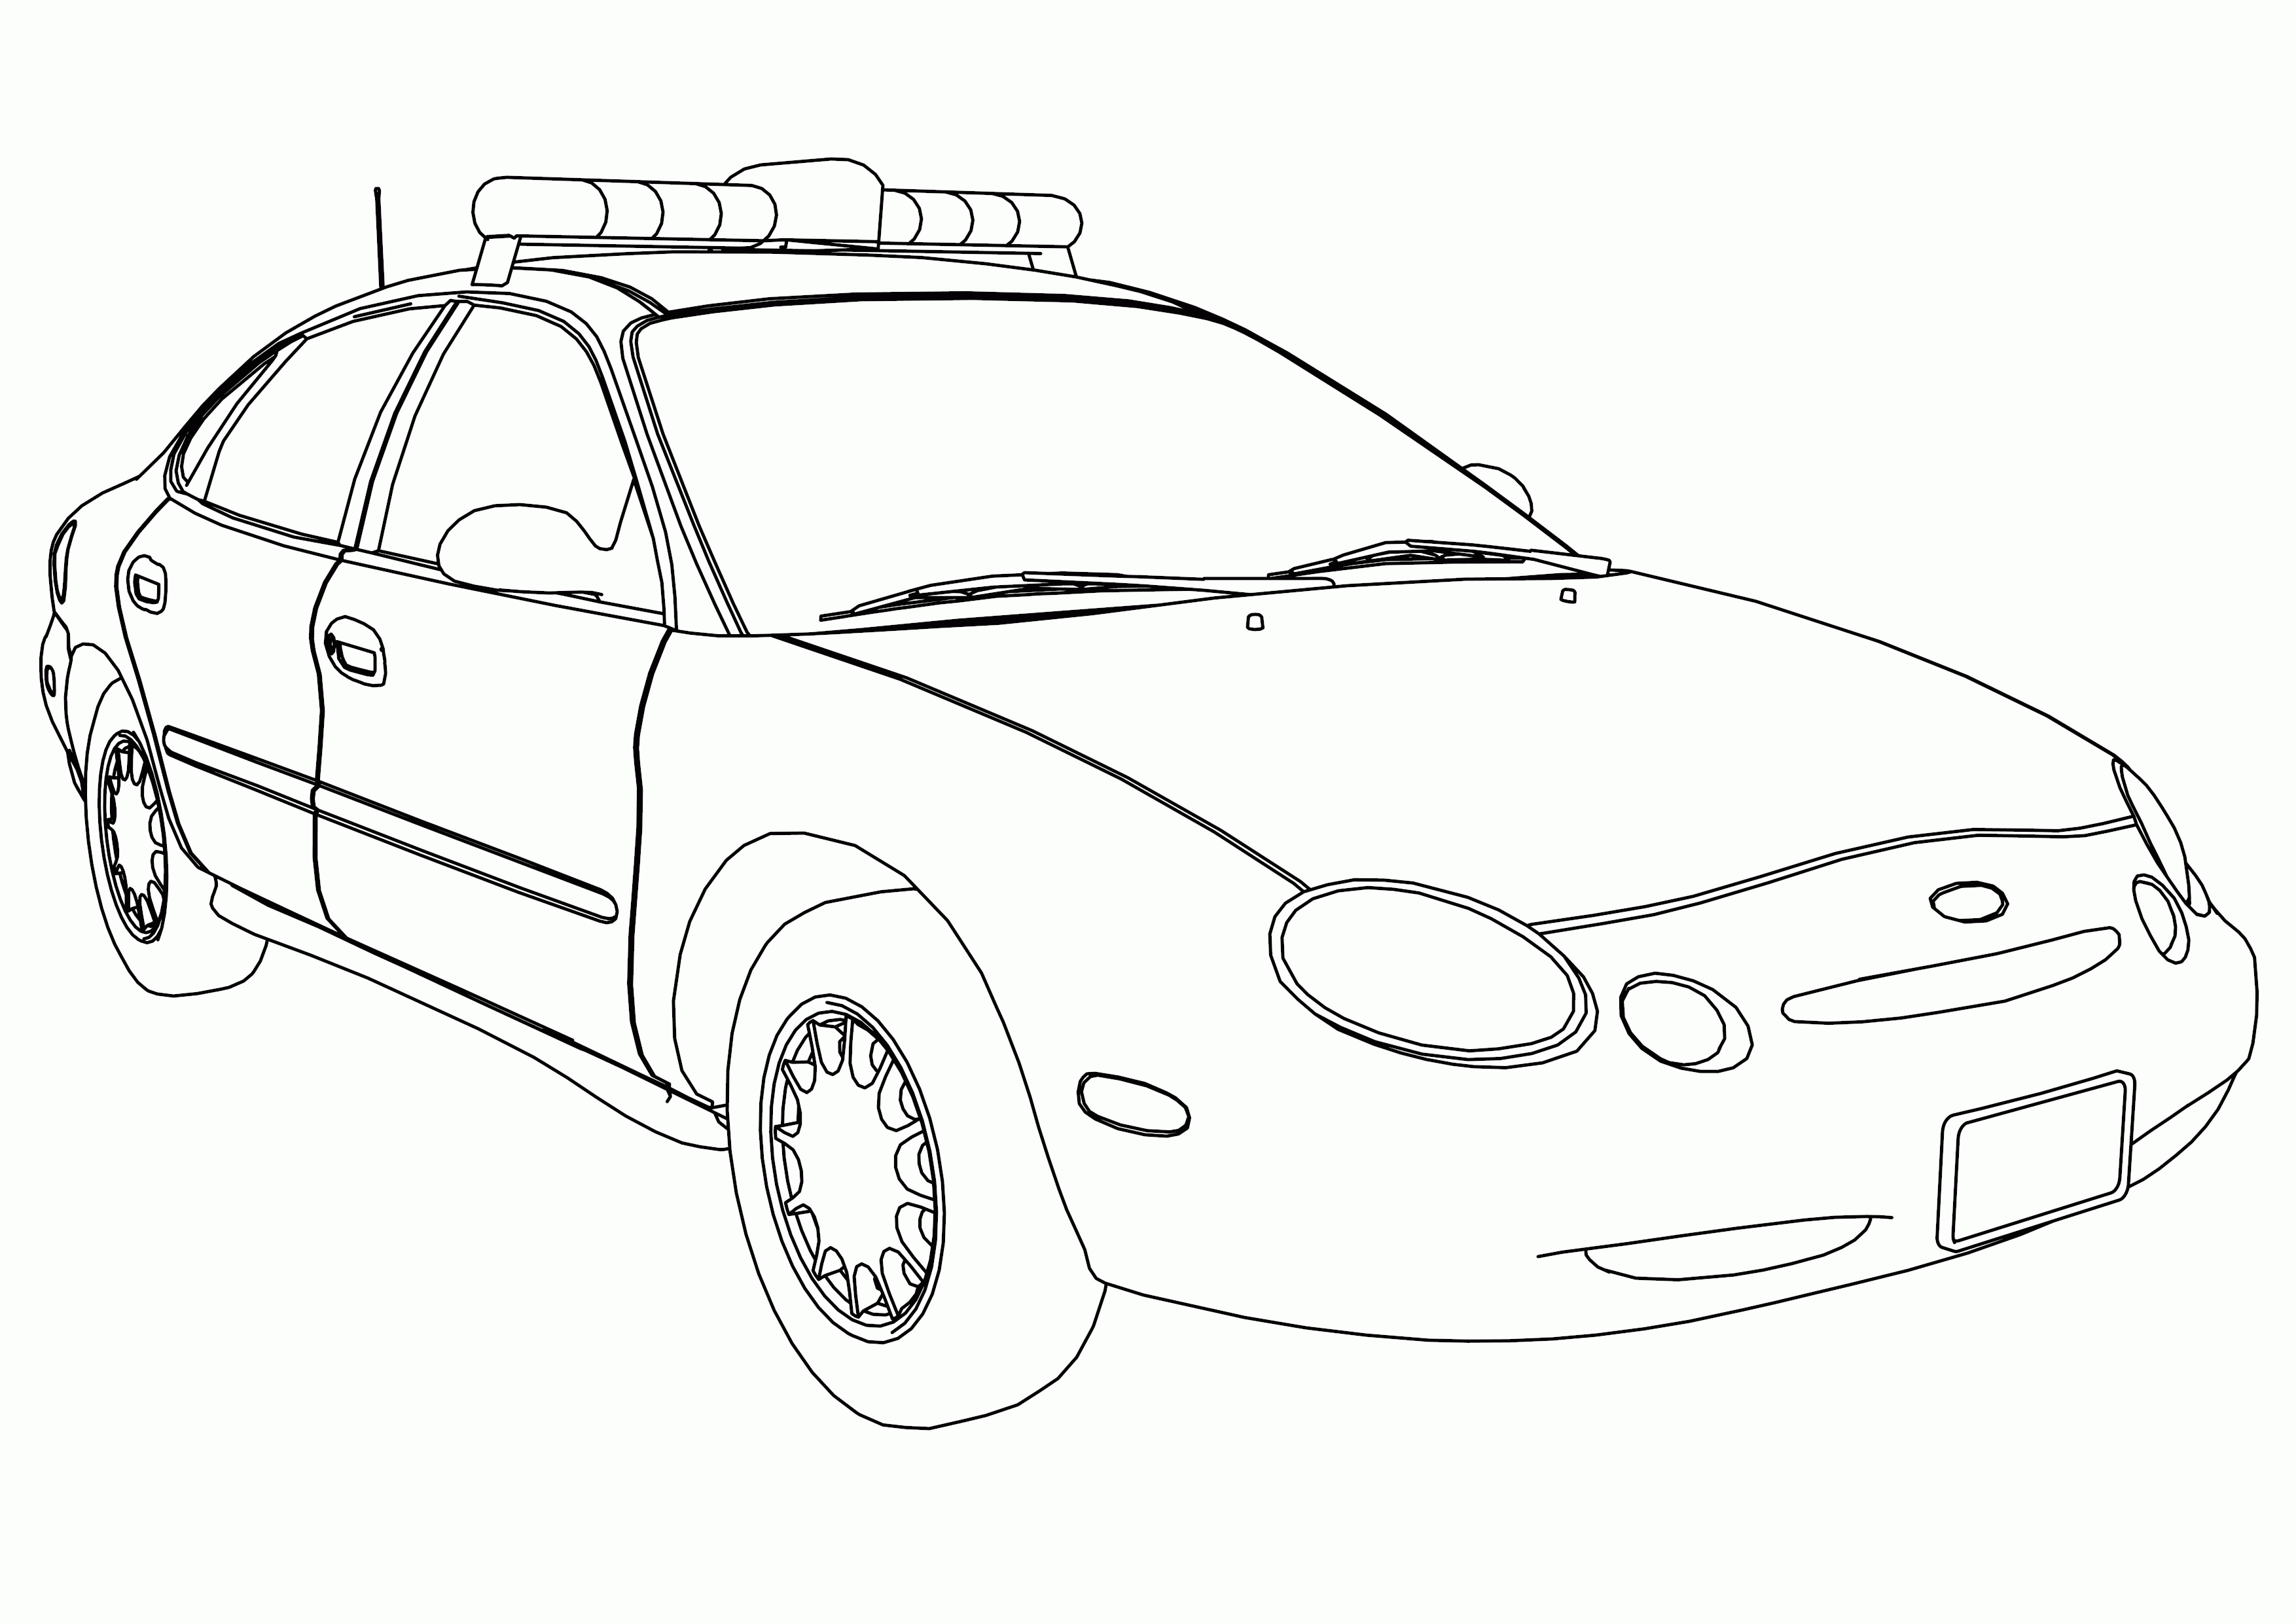 Ford taurus police car coloring page